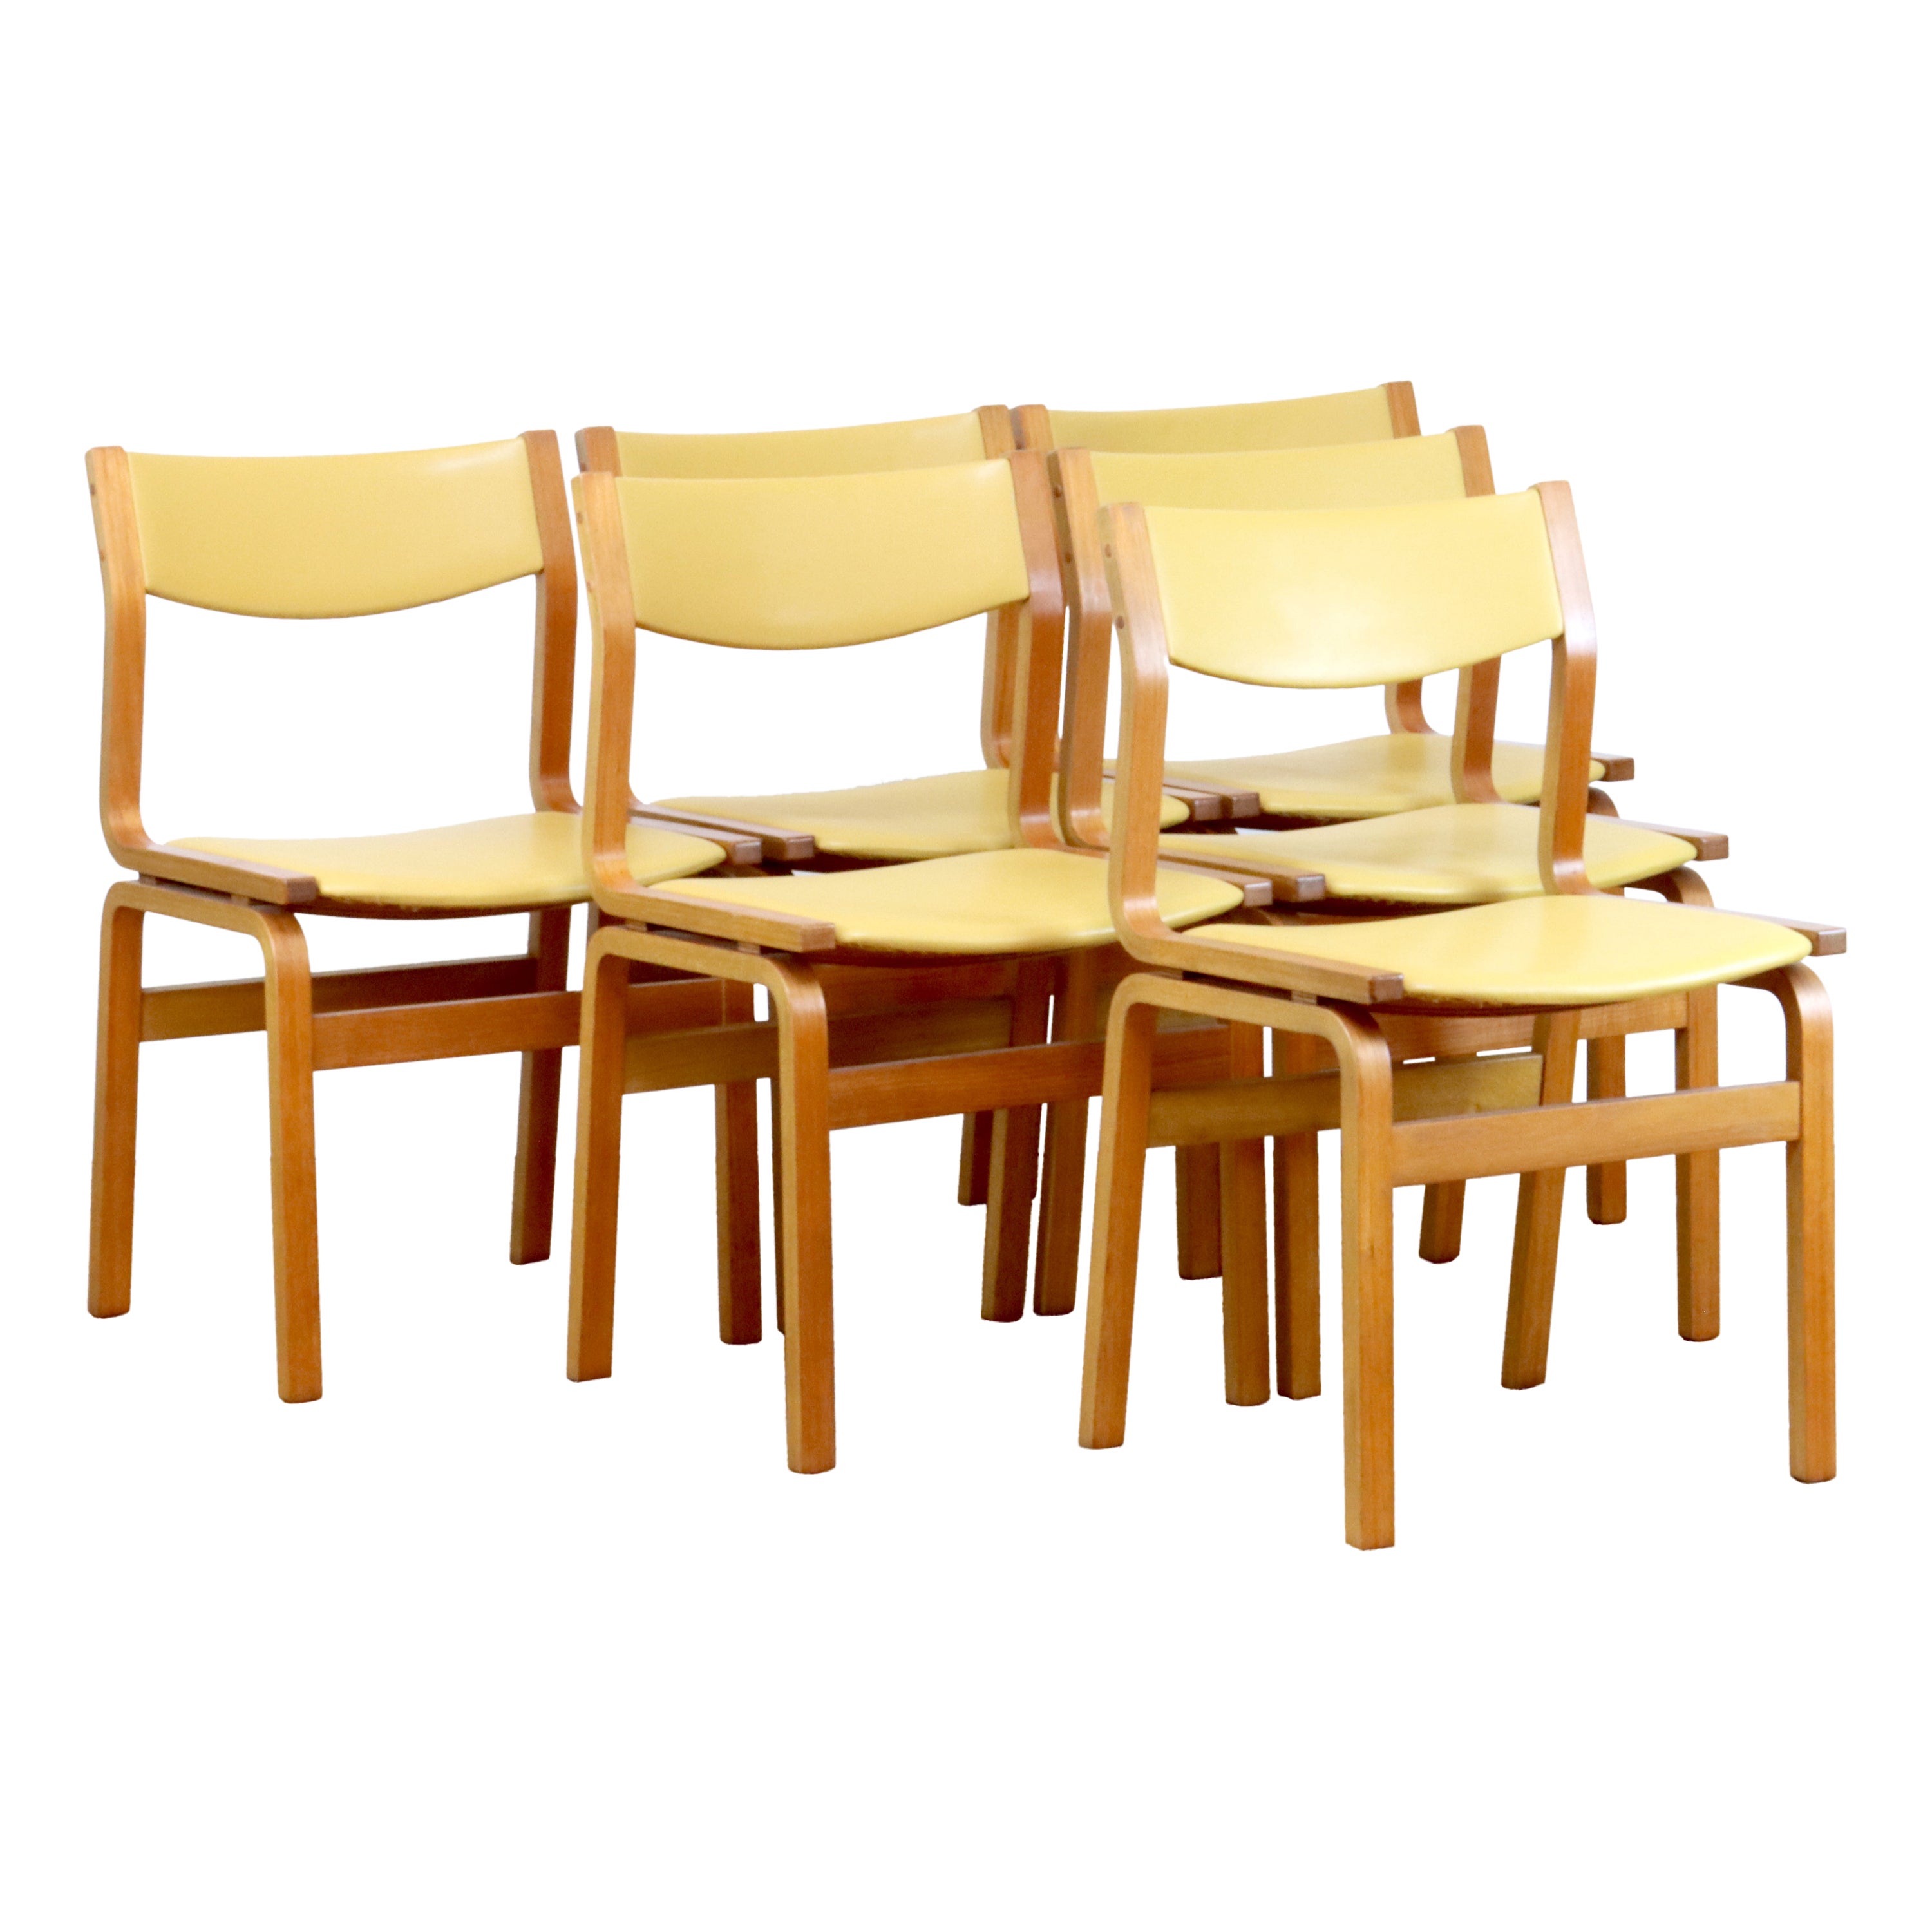 Set of 6 Chairs After Arne Jacobsen For Sale